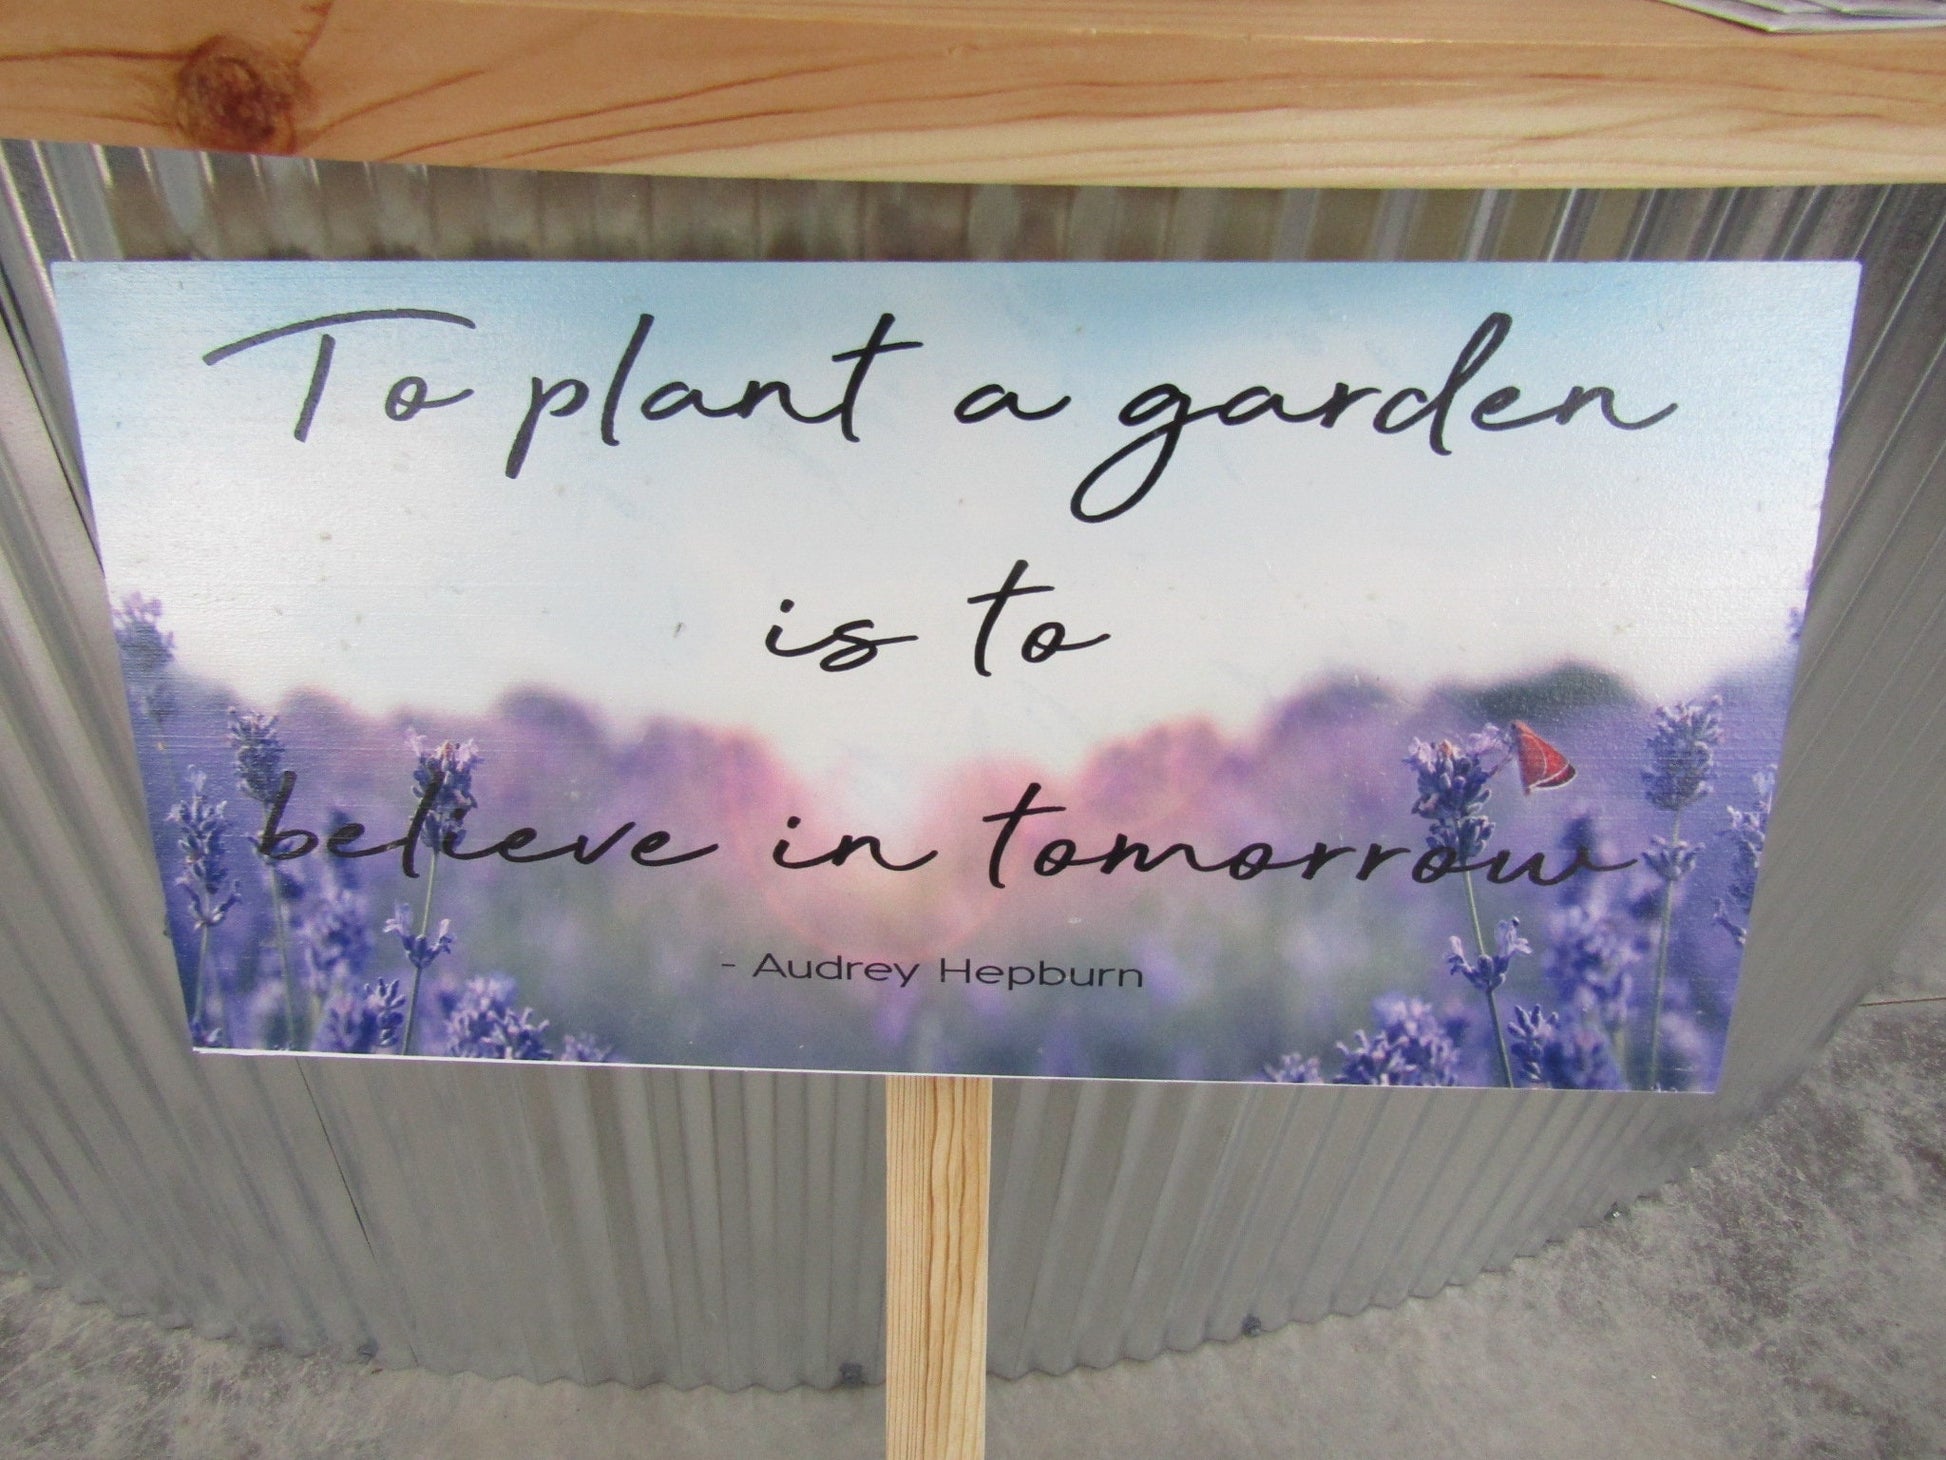 Garden Lavender Floral Mothers Gift Wife Gift Gardener Printed On Wood Decoration To plant a garden Color Bright Spring Summer Wooden Sign